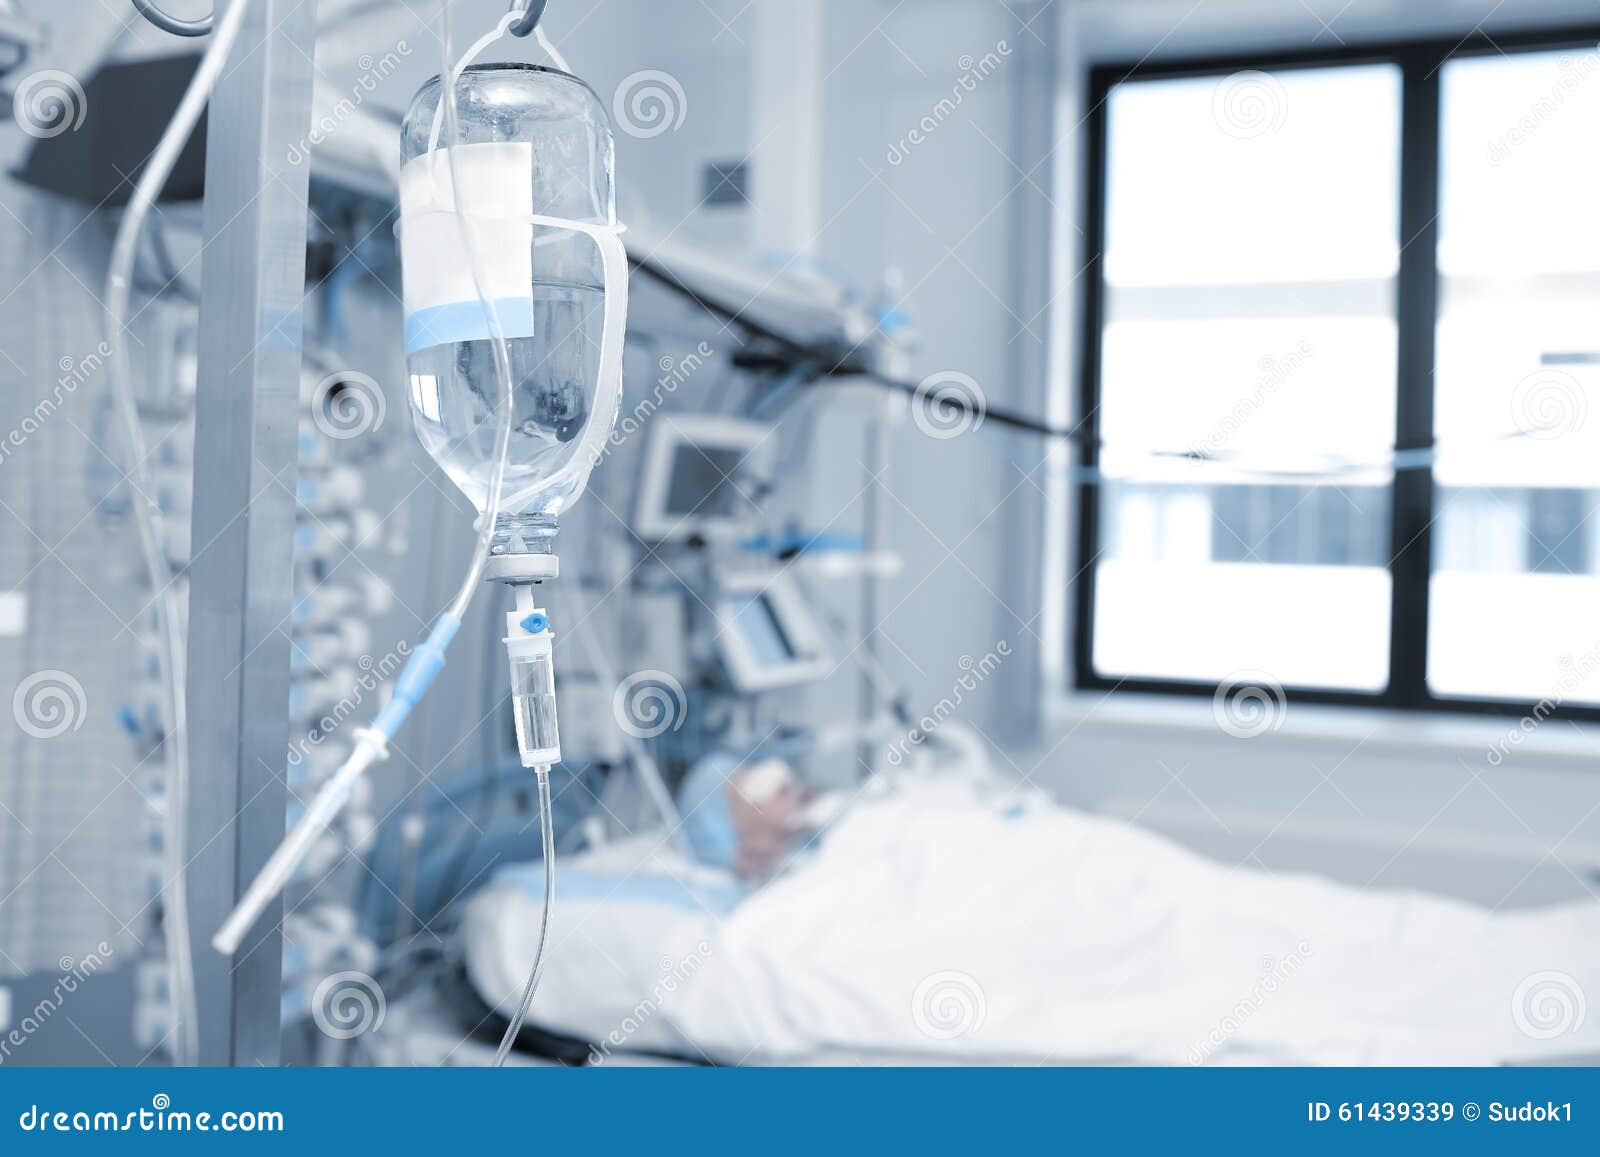 treatment of a patient in critical condition in the icu